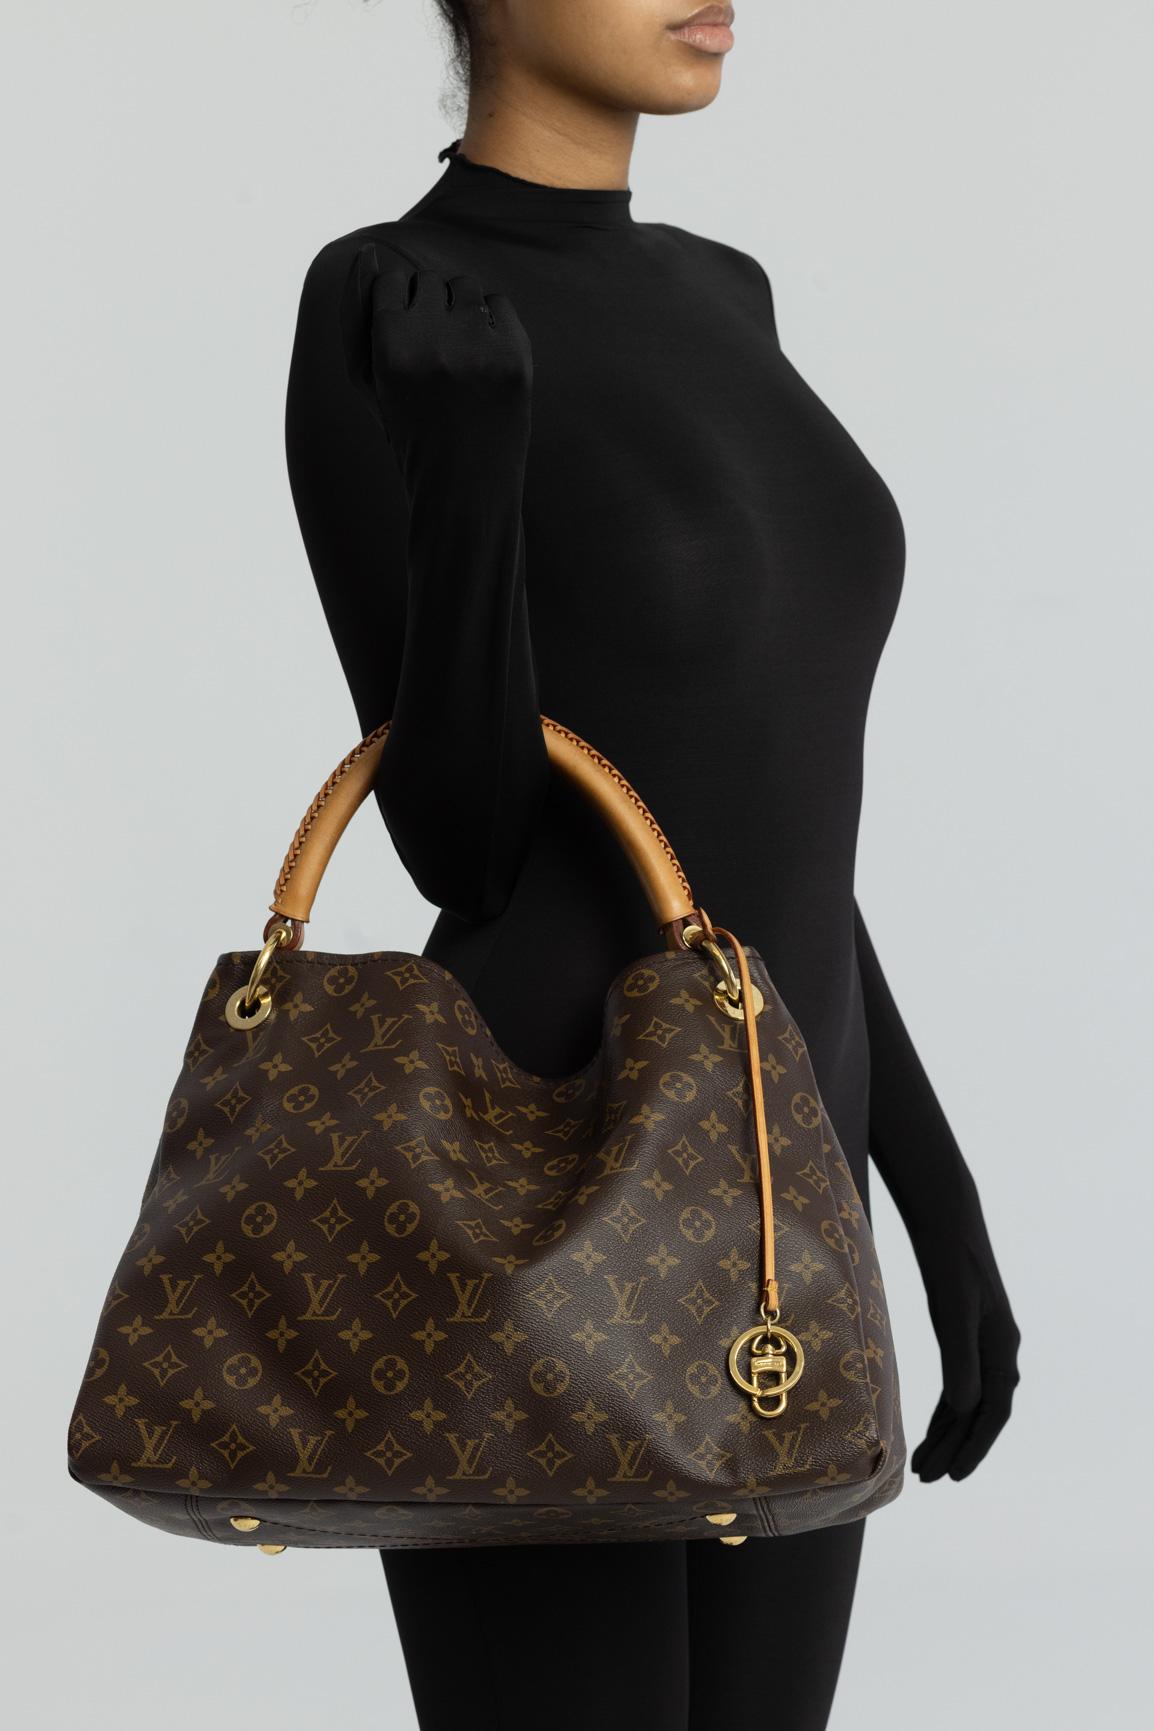 LV Artsy MM. This large tote is made of Louis monogram coated toile canvas. with leather finishes. The bag features a natural vachetta cowhide rolled leather handle with a sleek braided accent, an open, an ivory microfiber interior and an interior